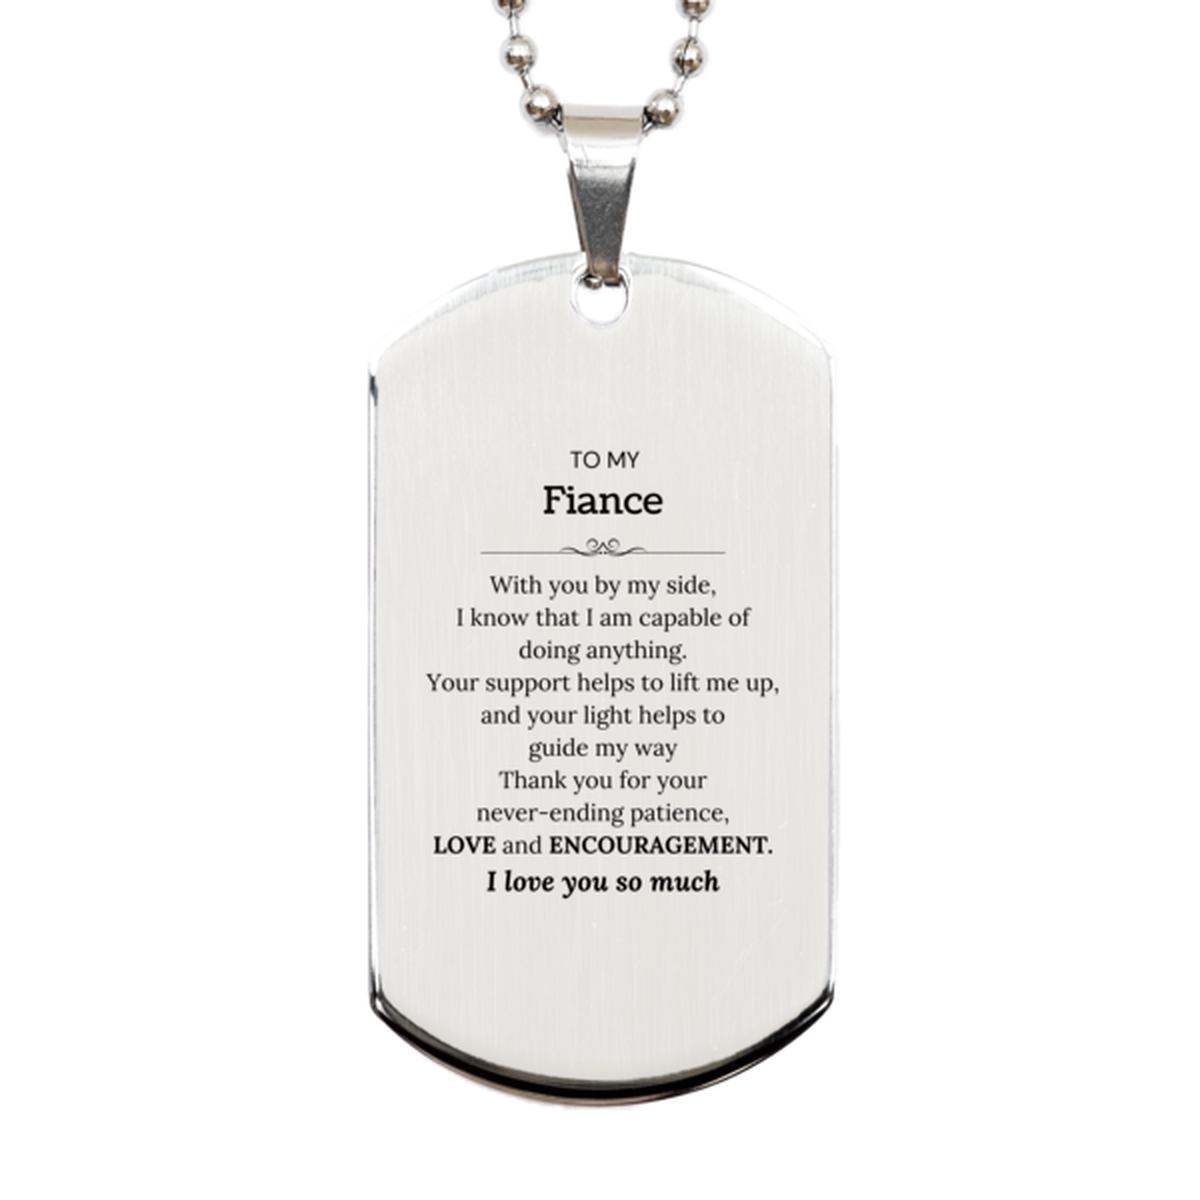 Appreciation Fiance Silver Dog Tag Gifts, To My Fiance Birthday Christmas Wedding Keepsake Gifts for Fiance With you by my side, I know that I am capable of doing anything. I love you so much